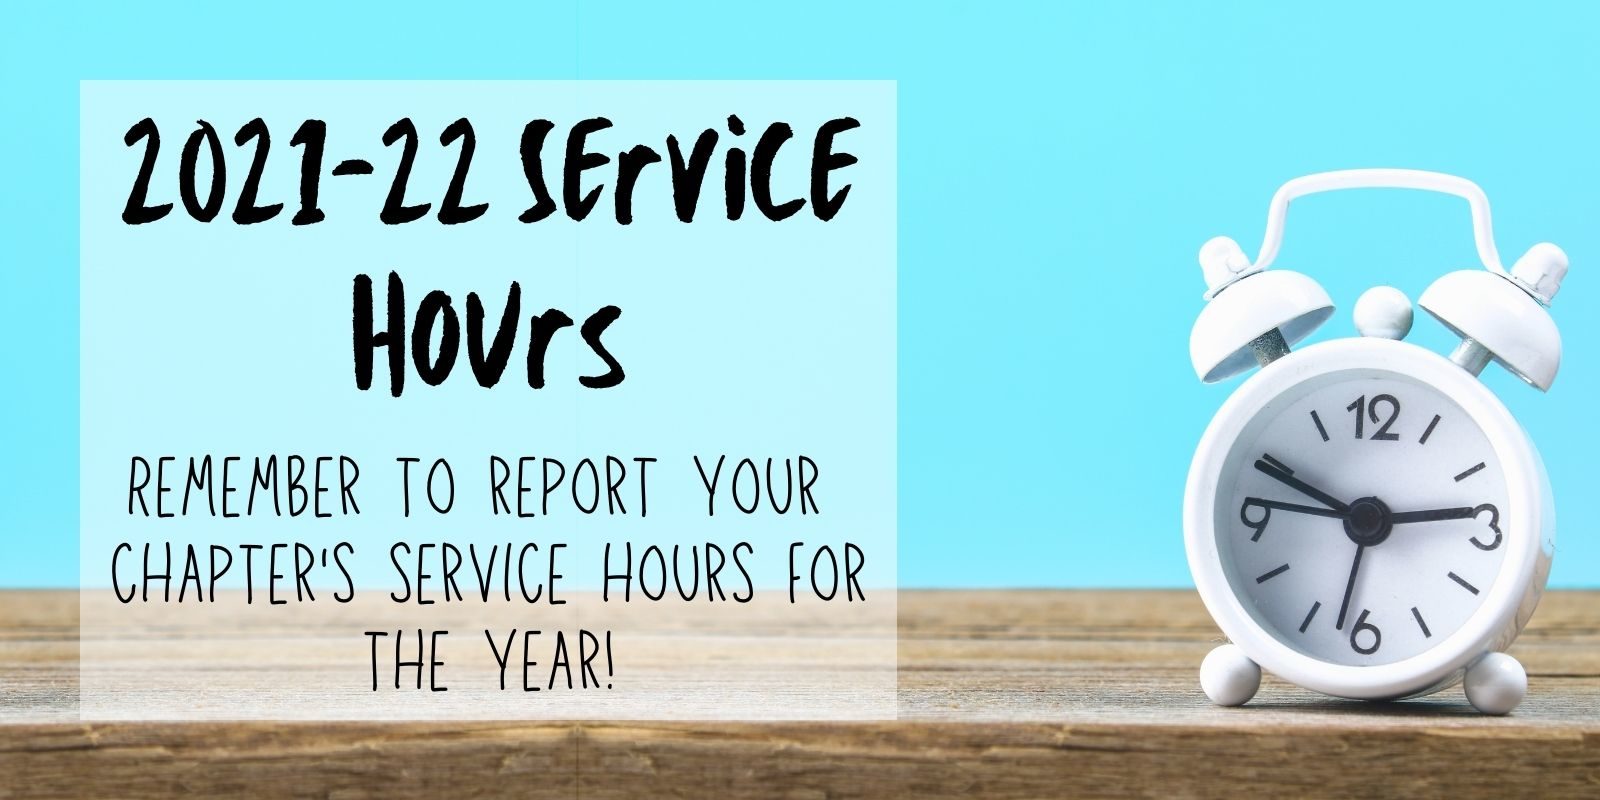 Reporting Service Hours is Easy!